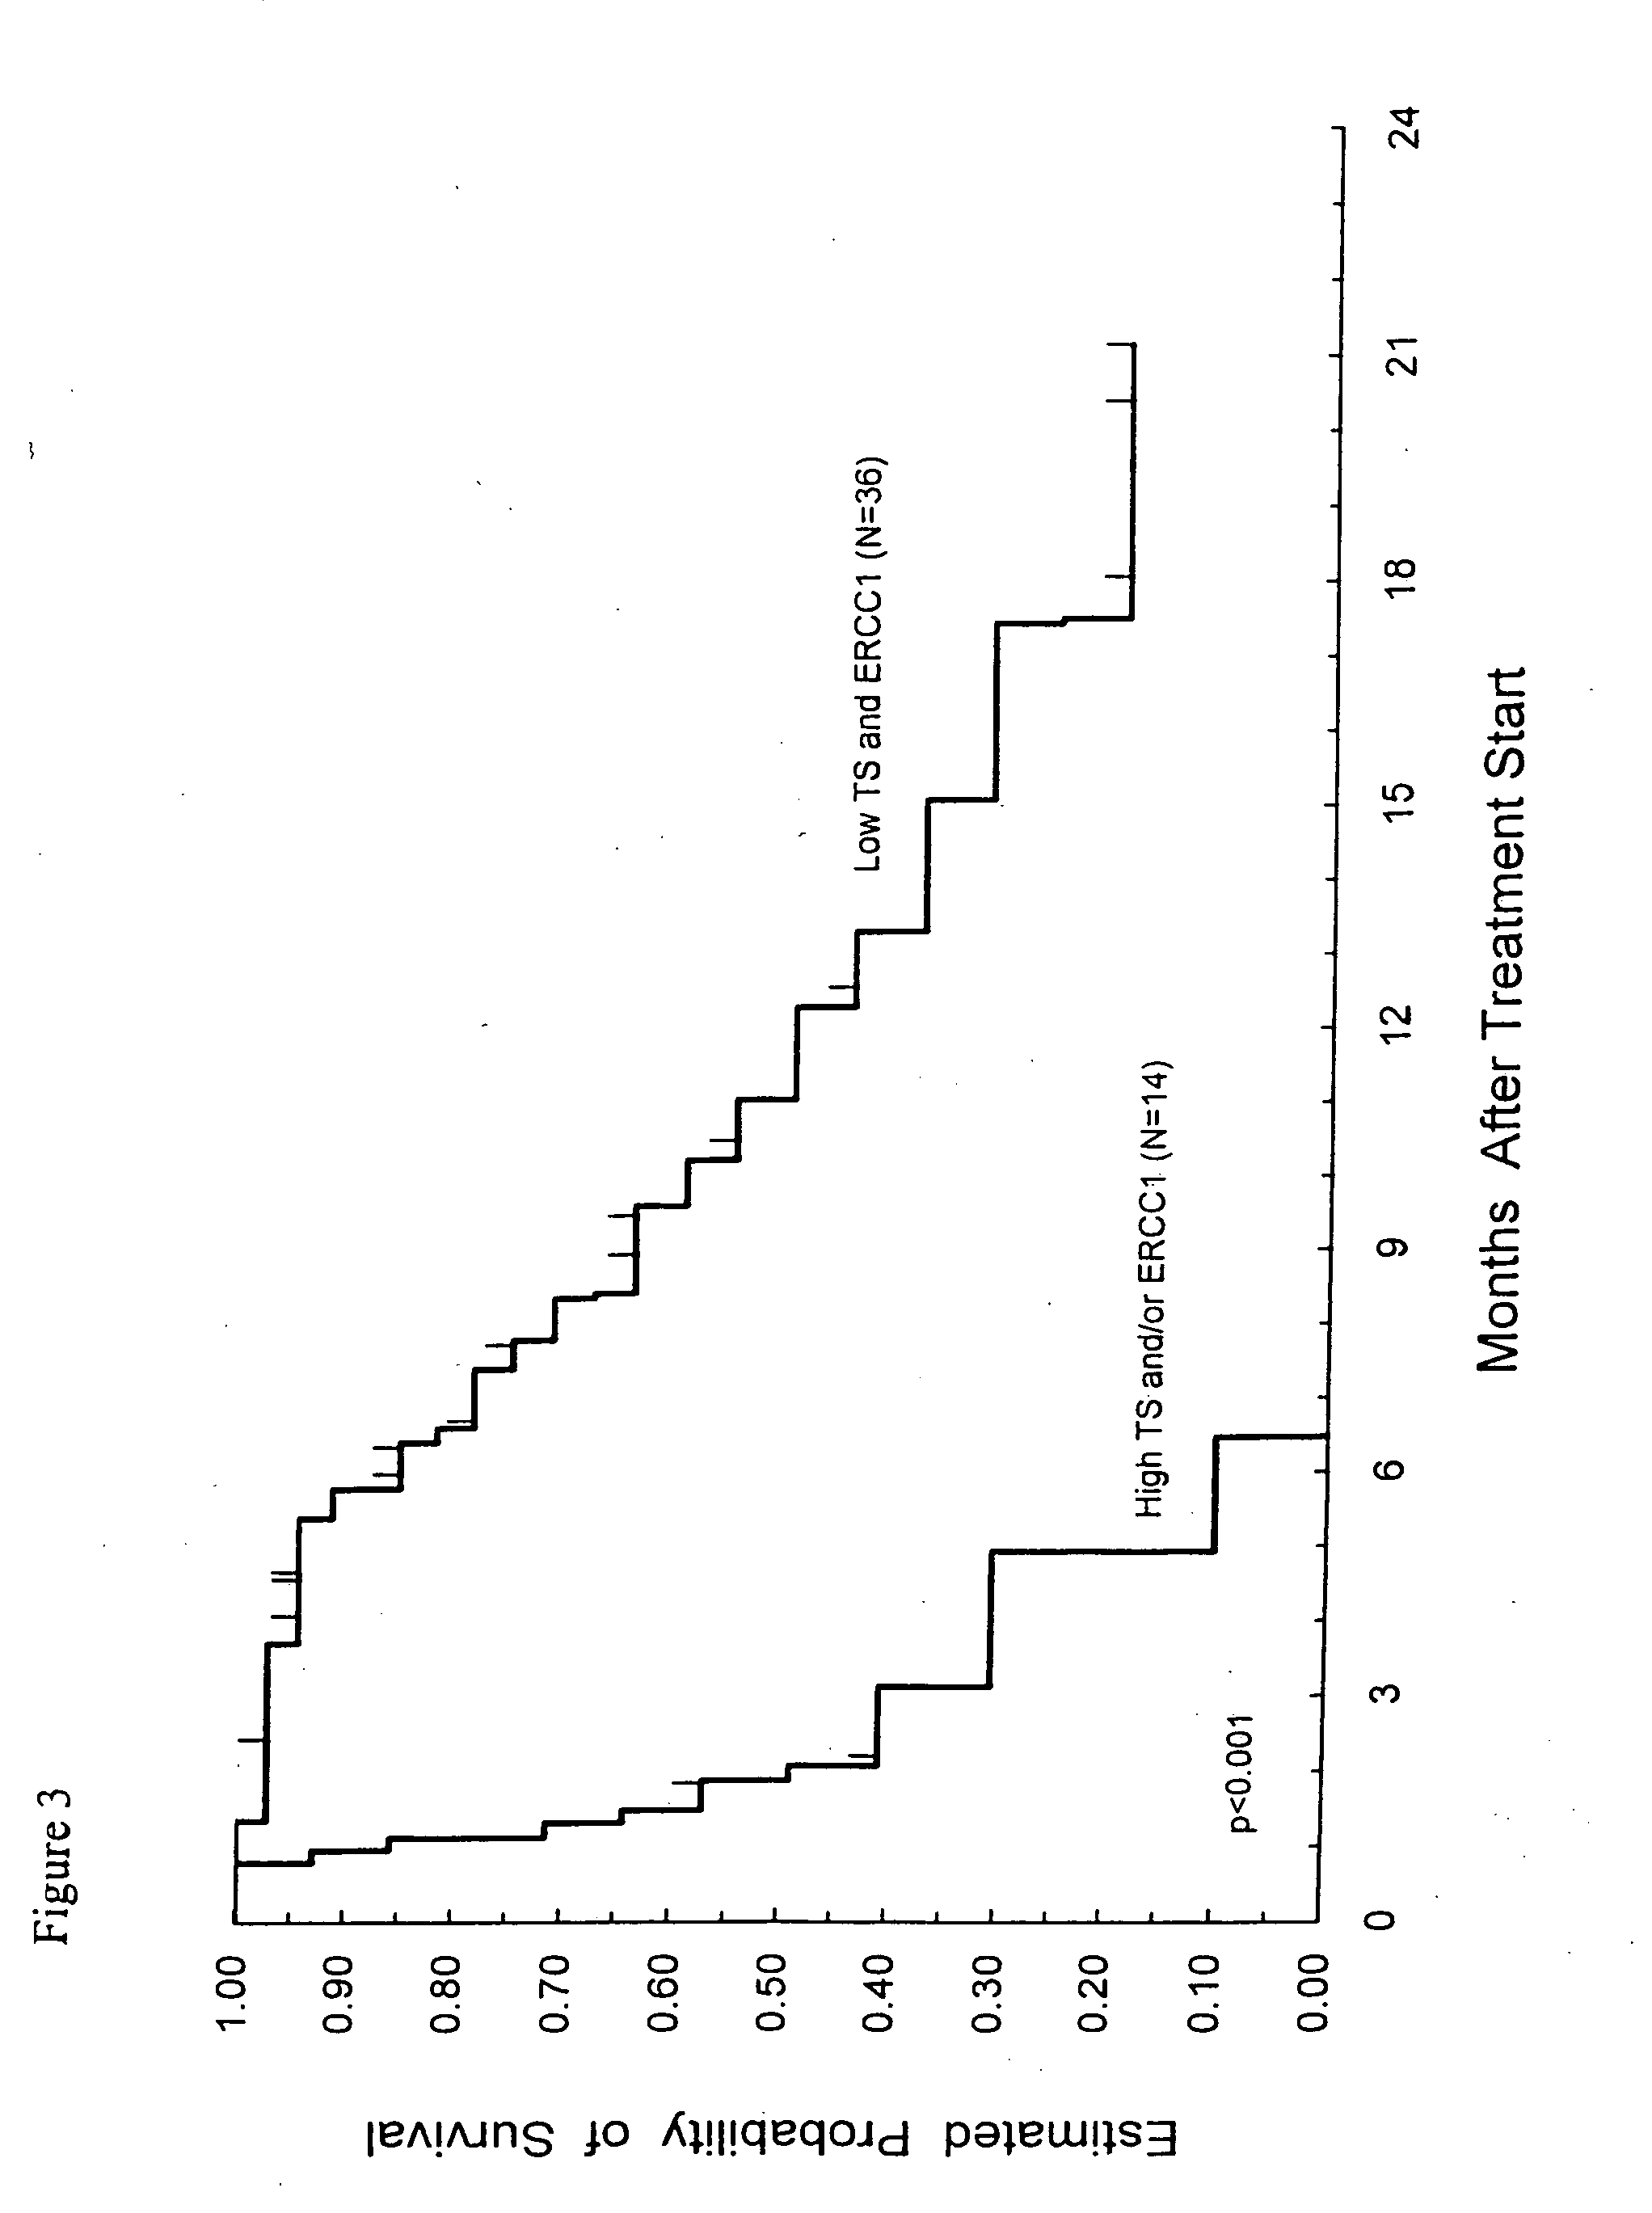 Method of determining a chemotherapeutic regimen based on ERCC1 and TS expression